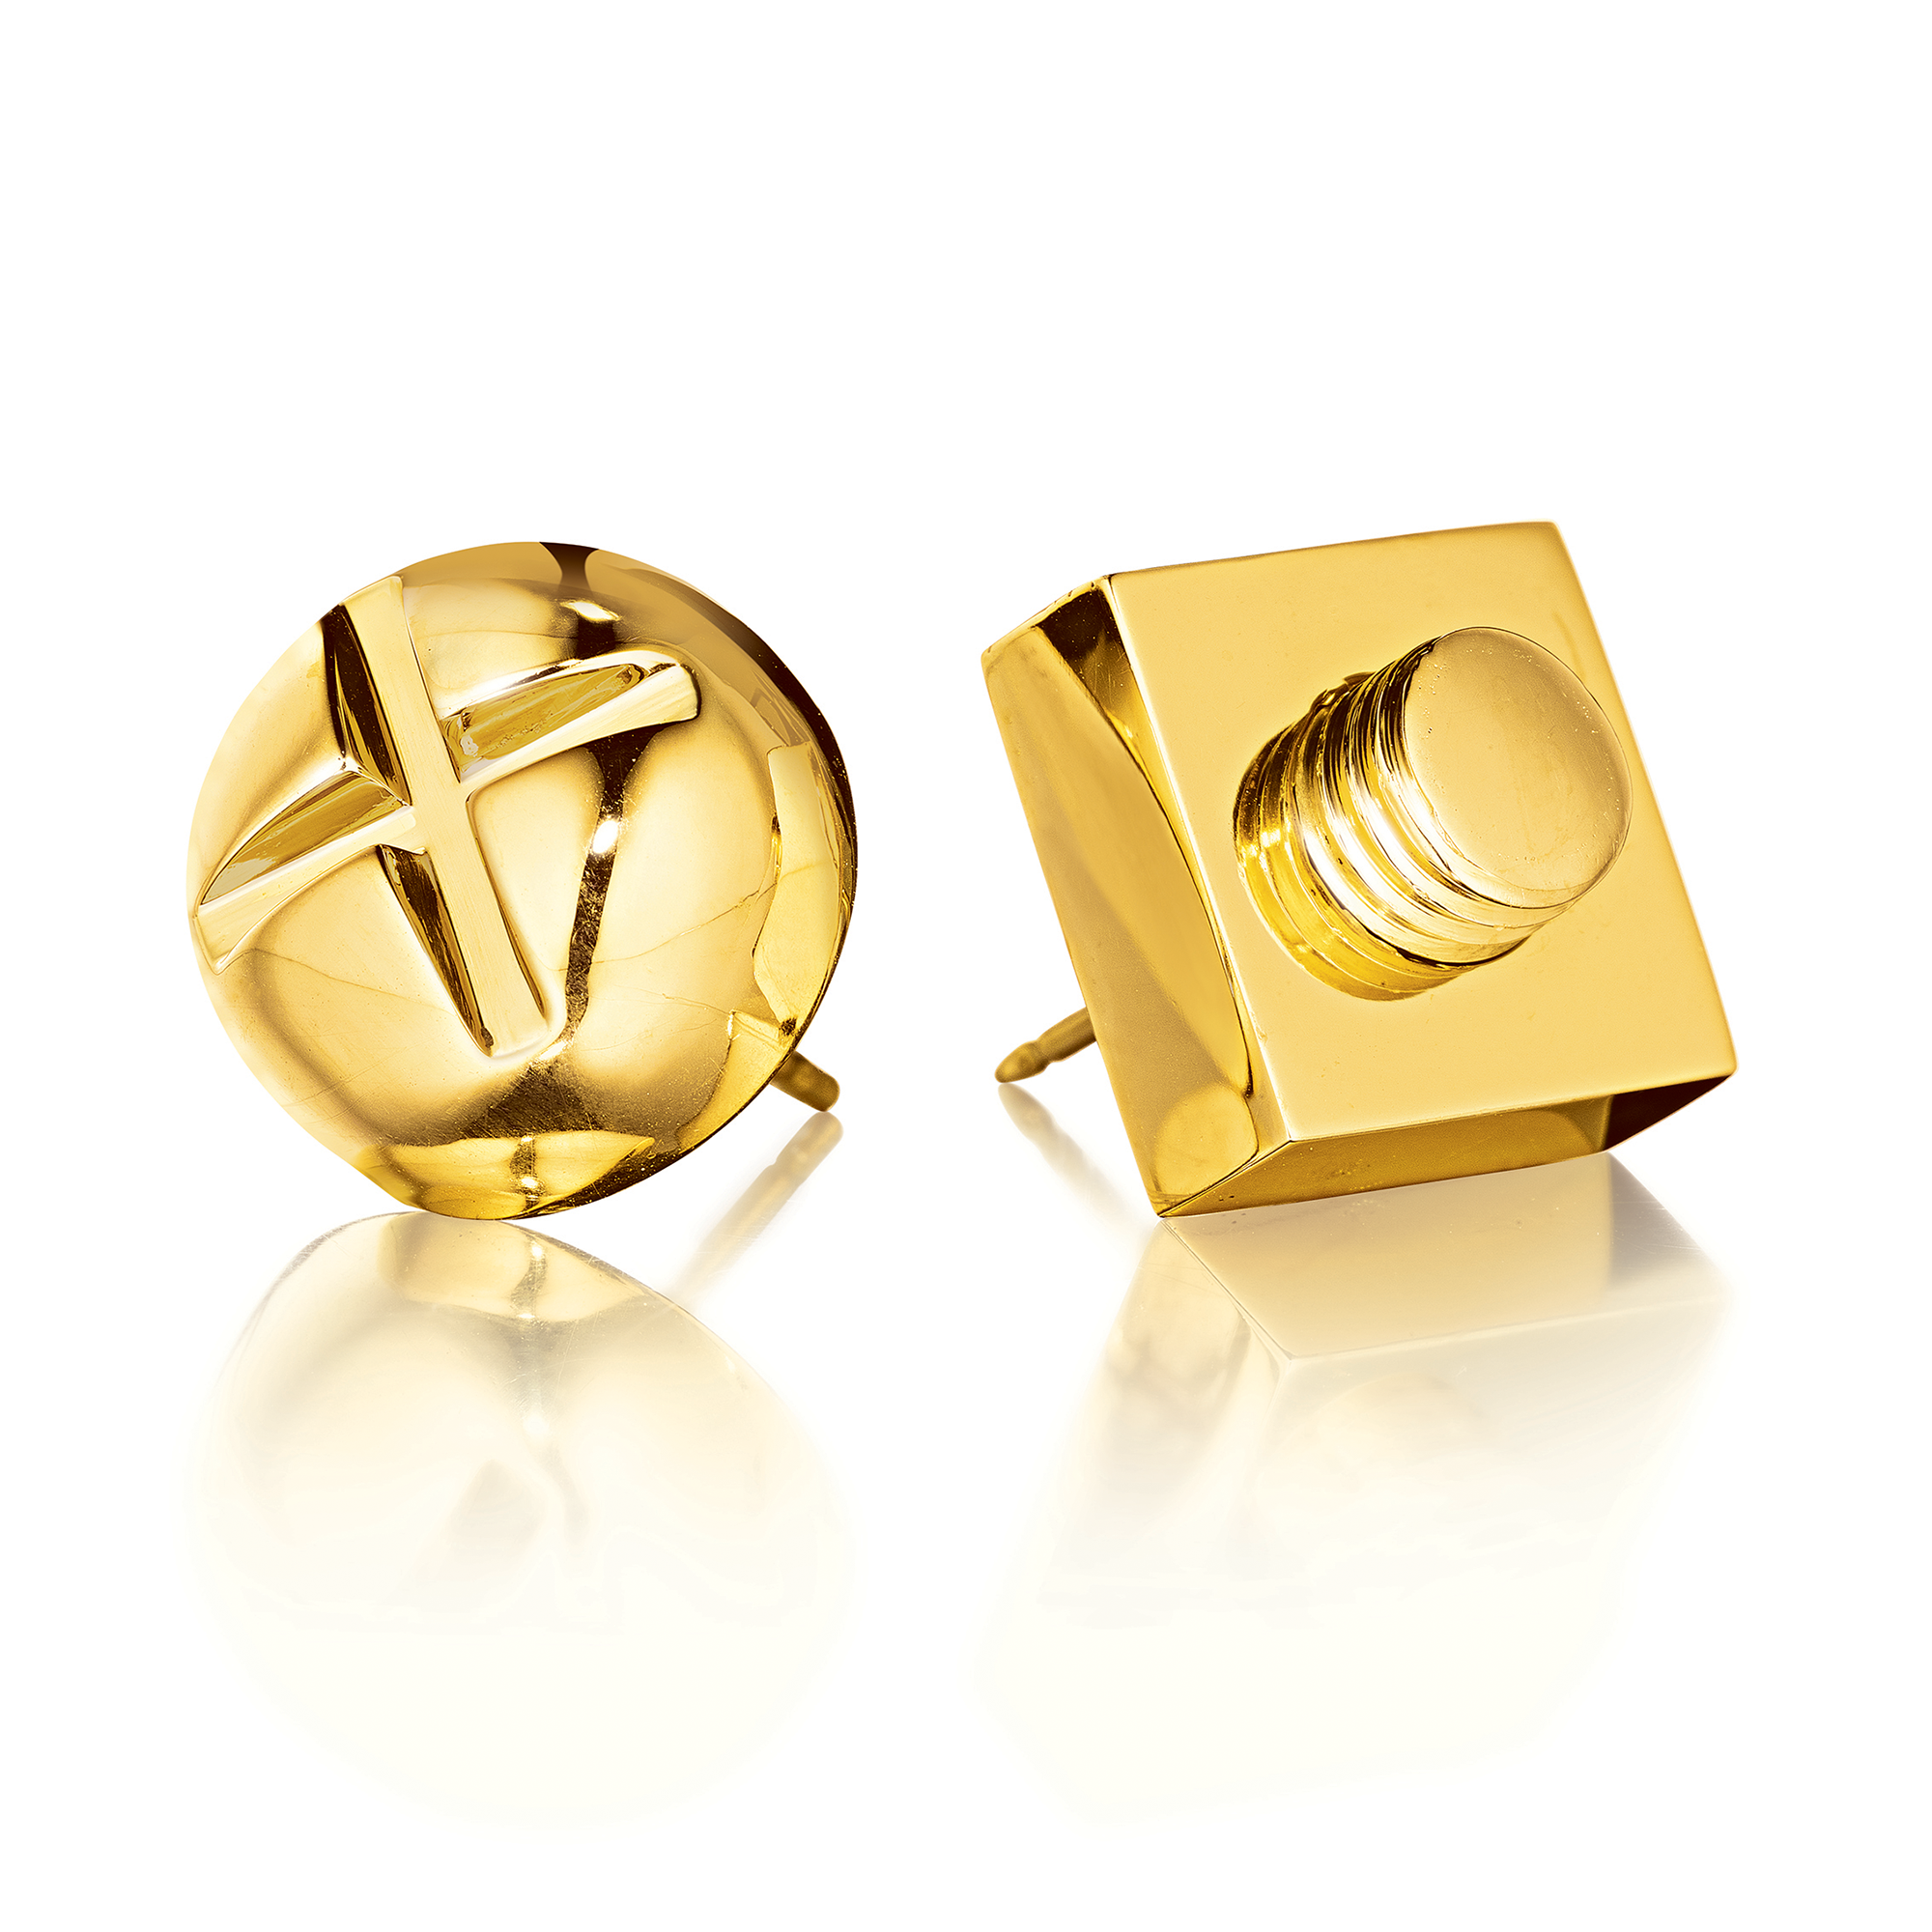 Nut and Bolt earrings gold